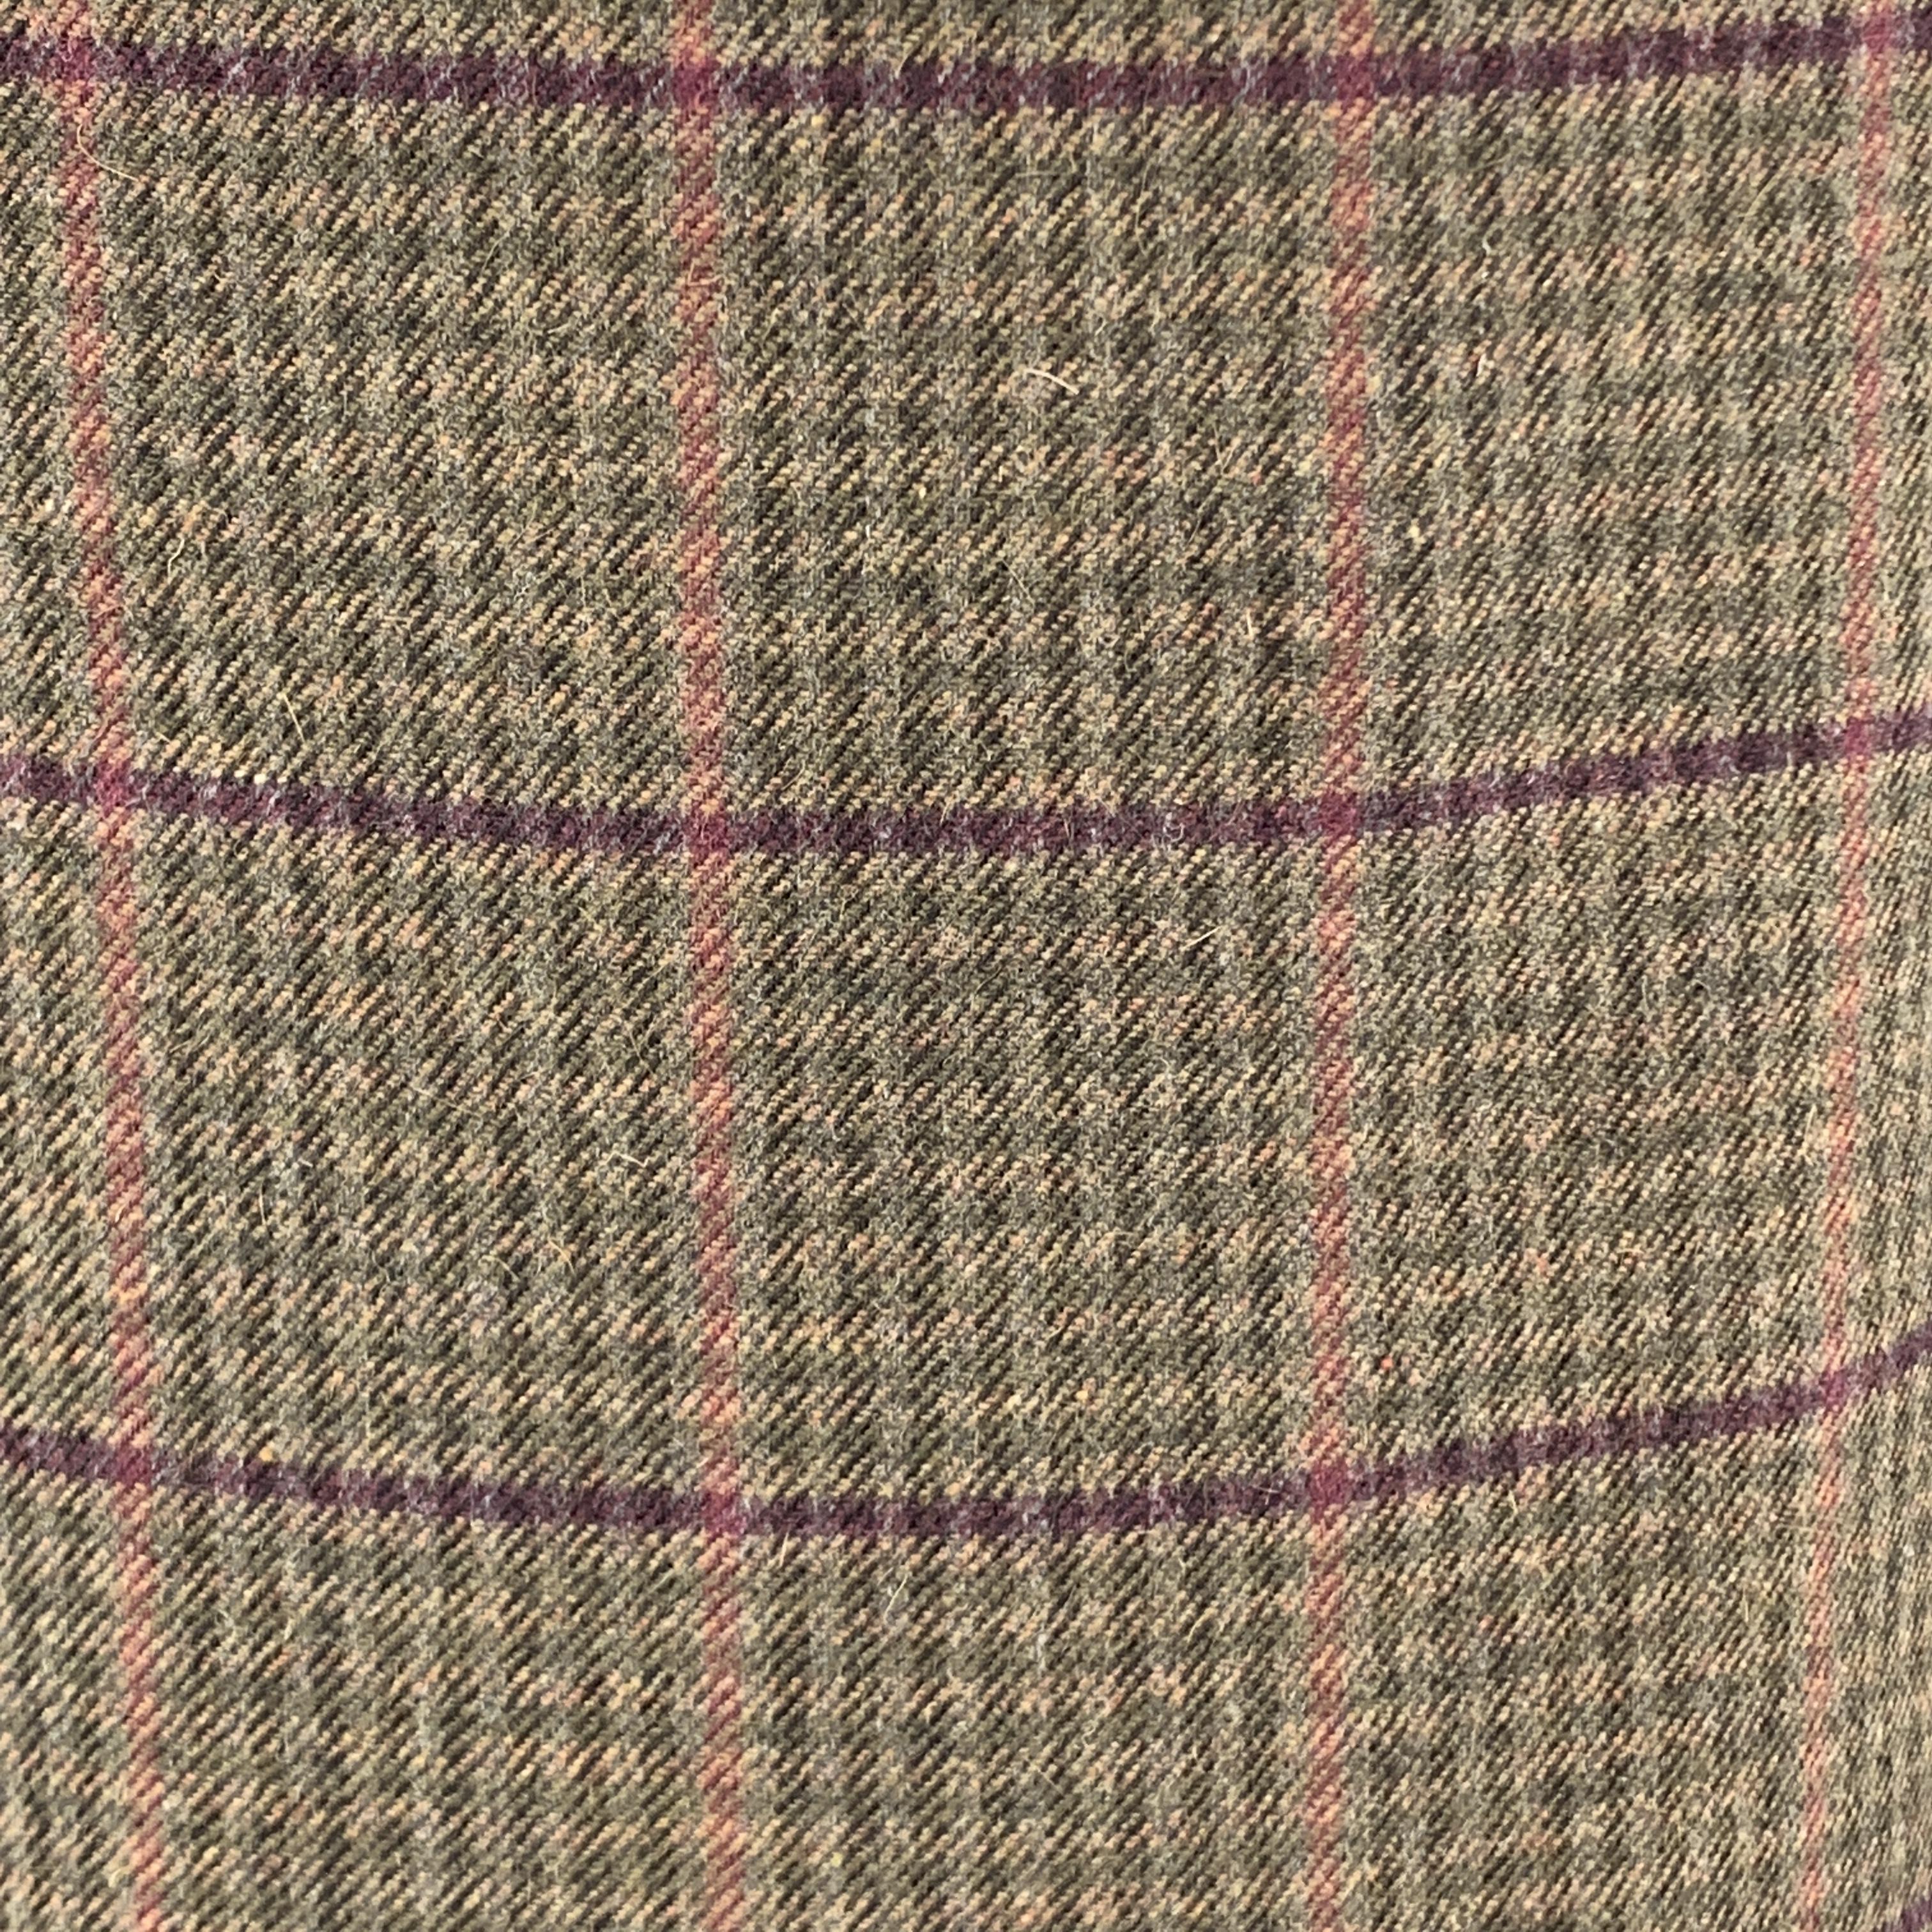 RALPH LAUREN COLLECTION longline pencil skirt comes in olive green and deep plum purple plaid labswool angora blend flannel with a button slit. Made in USA.

Excellent Pre-Owned Condition.
Marked: 4

Measurements:

Waist: 28 in.
Hip: 35 in.
Length: